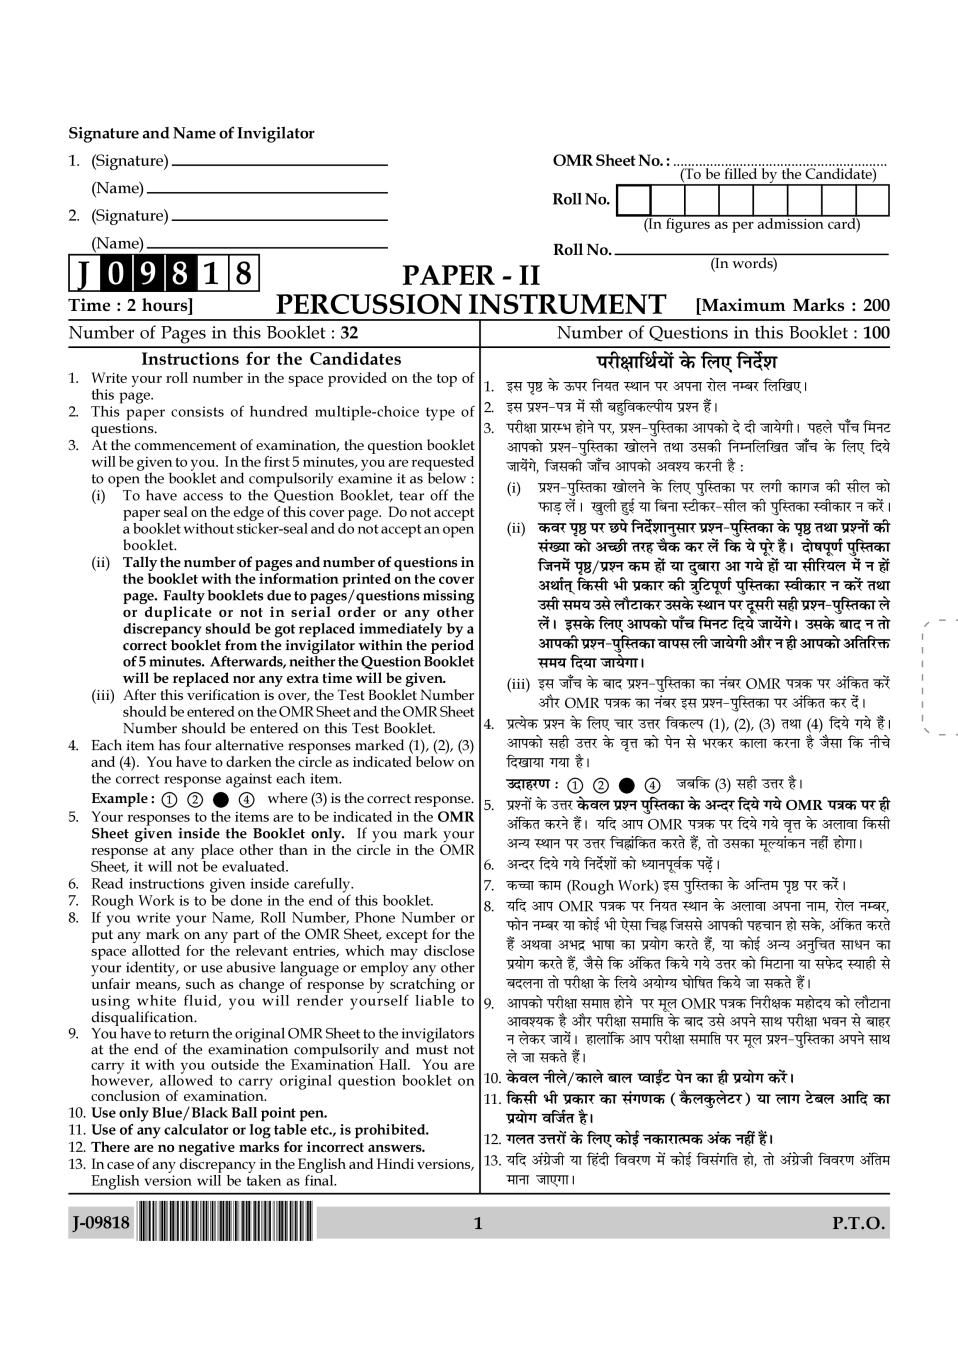 UGC NET Percussion Instruments Question Paper 2018 - Page 1